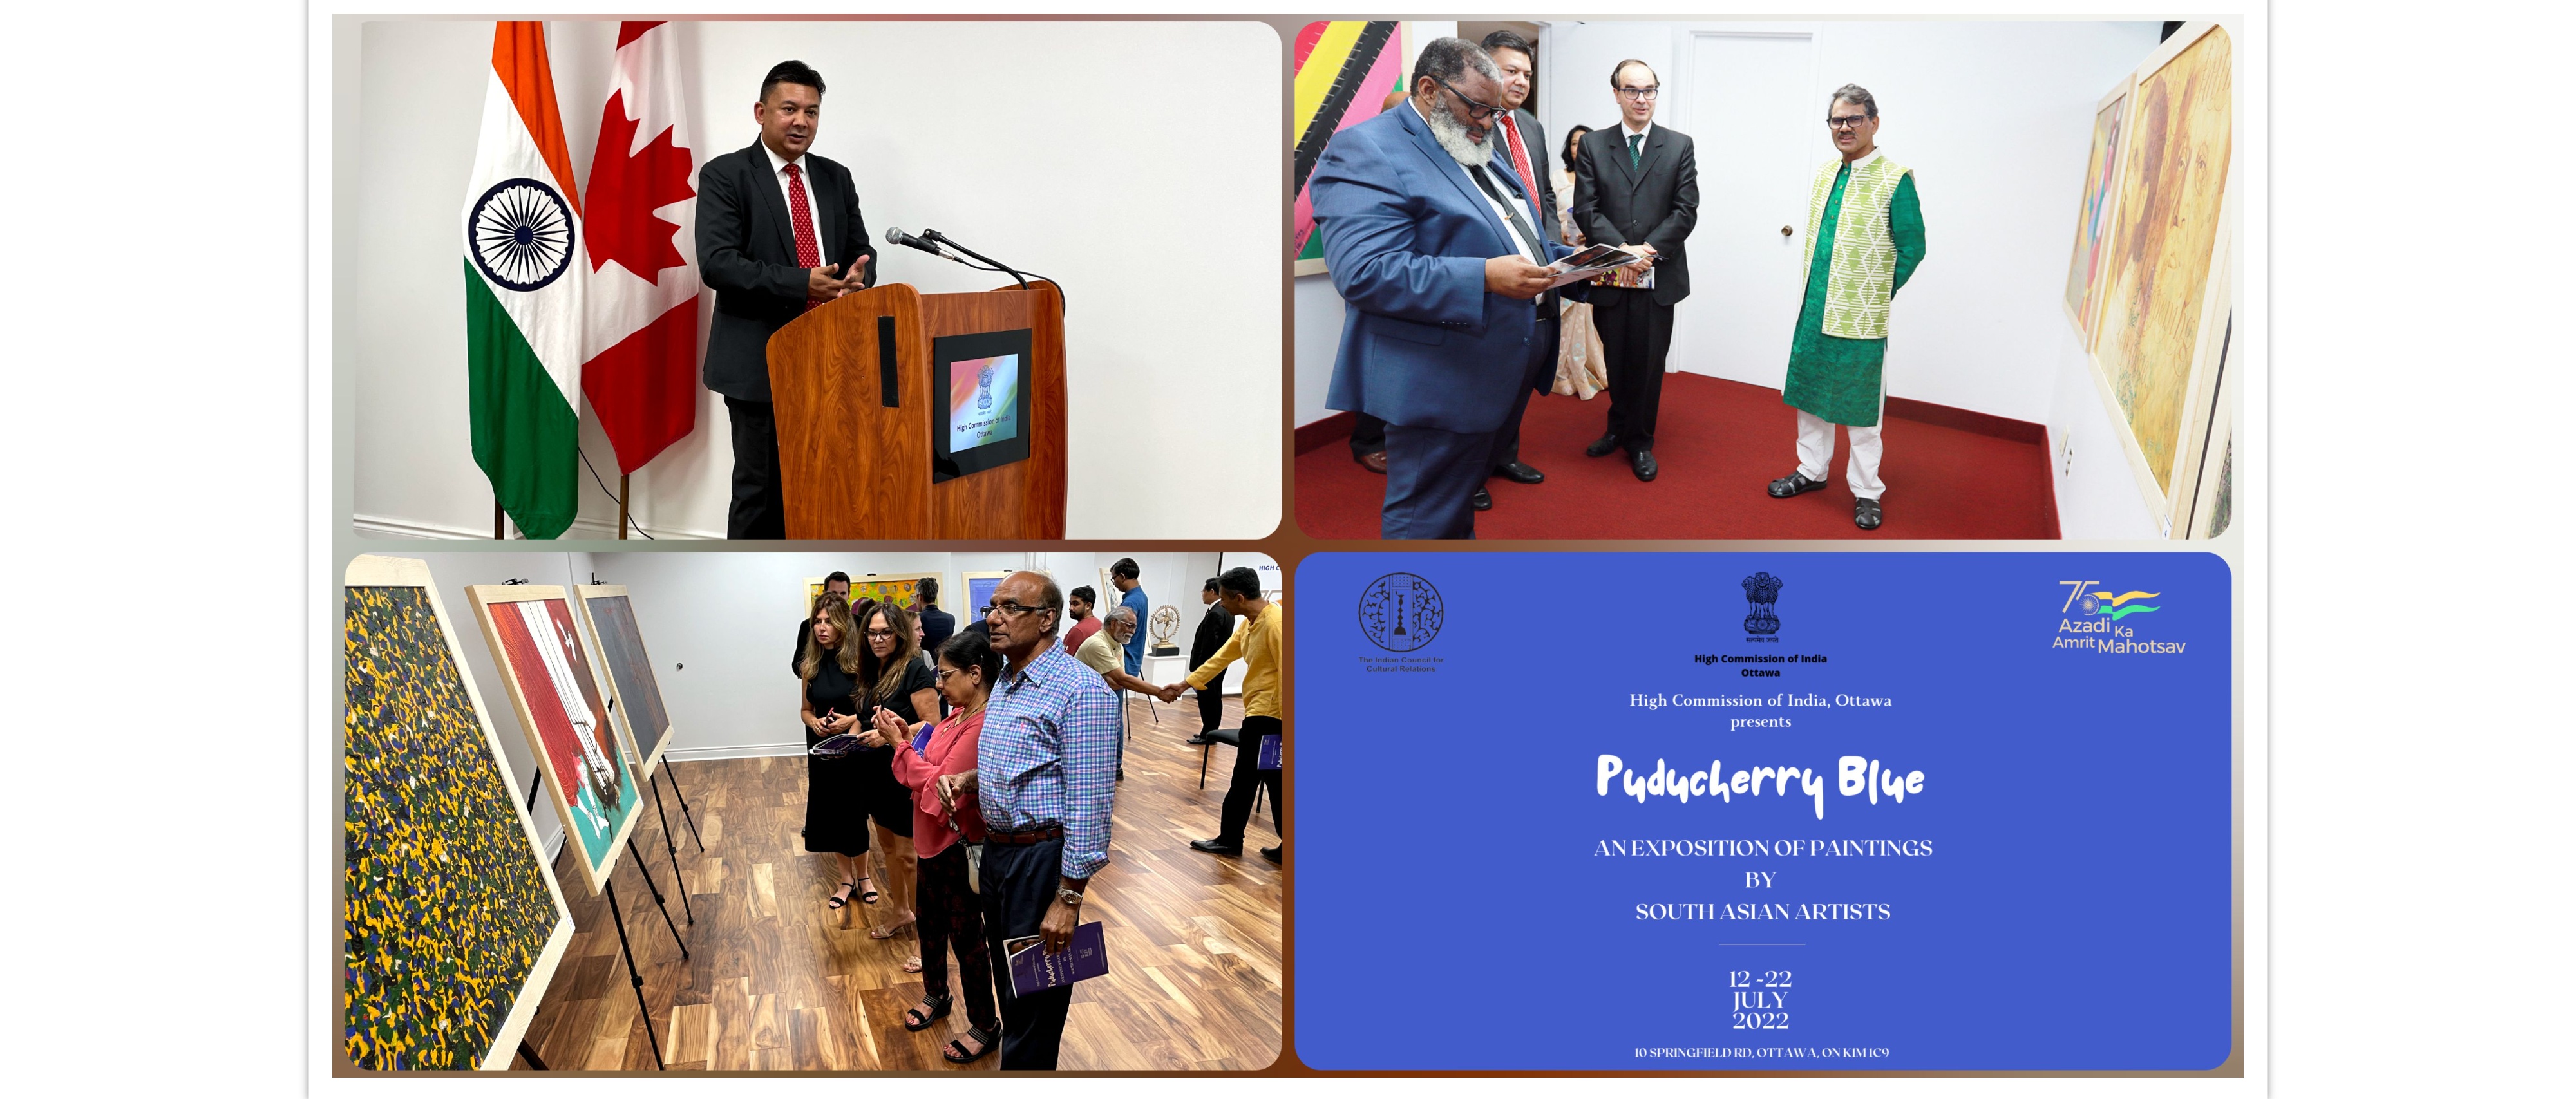  Acting High Commissioner Anshuman Gaur inaugurated "Puducherry Blue" painting exhibition on 12 July 2022  at High Commission of India, Ottawa